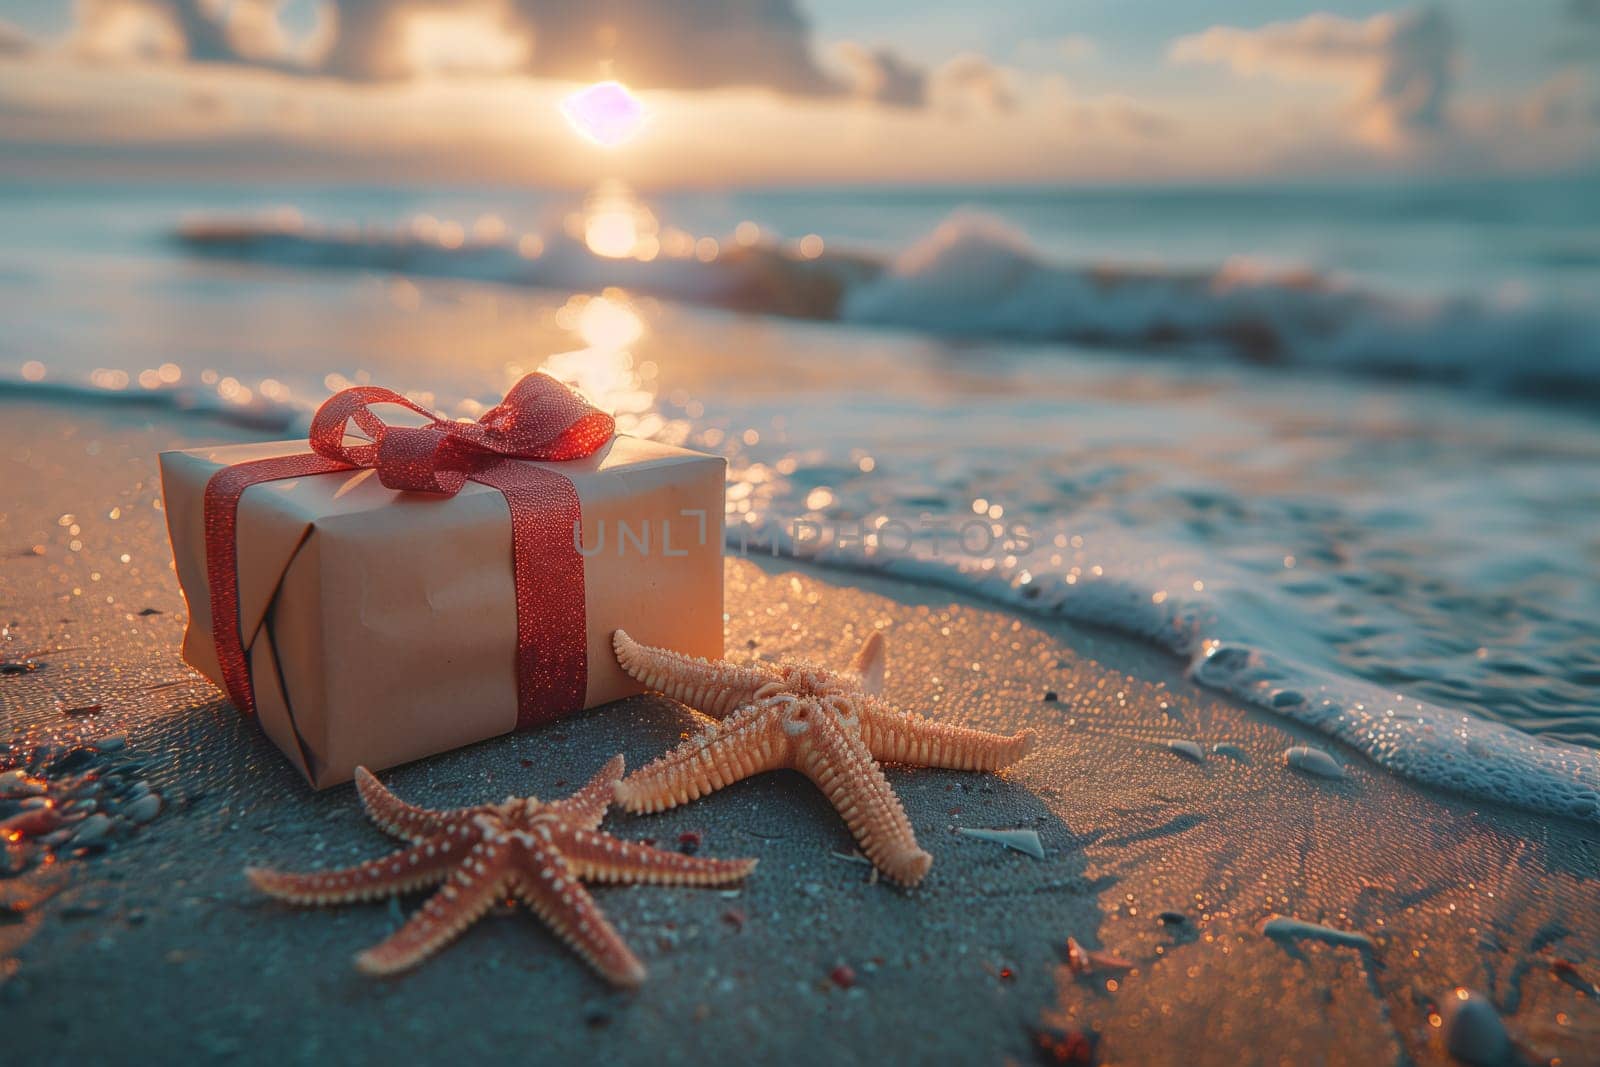 Artful gift box and starfish rest on beach near ocean, under sky and clouds by richwolf